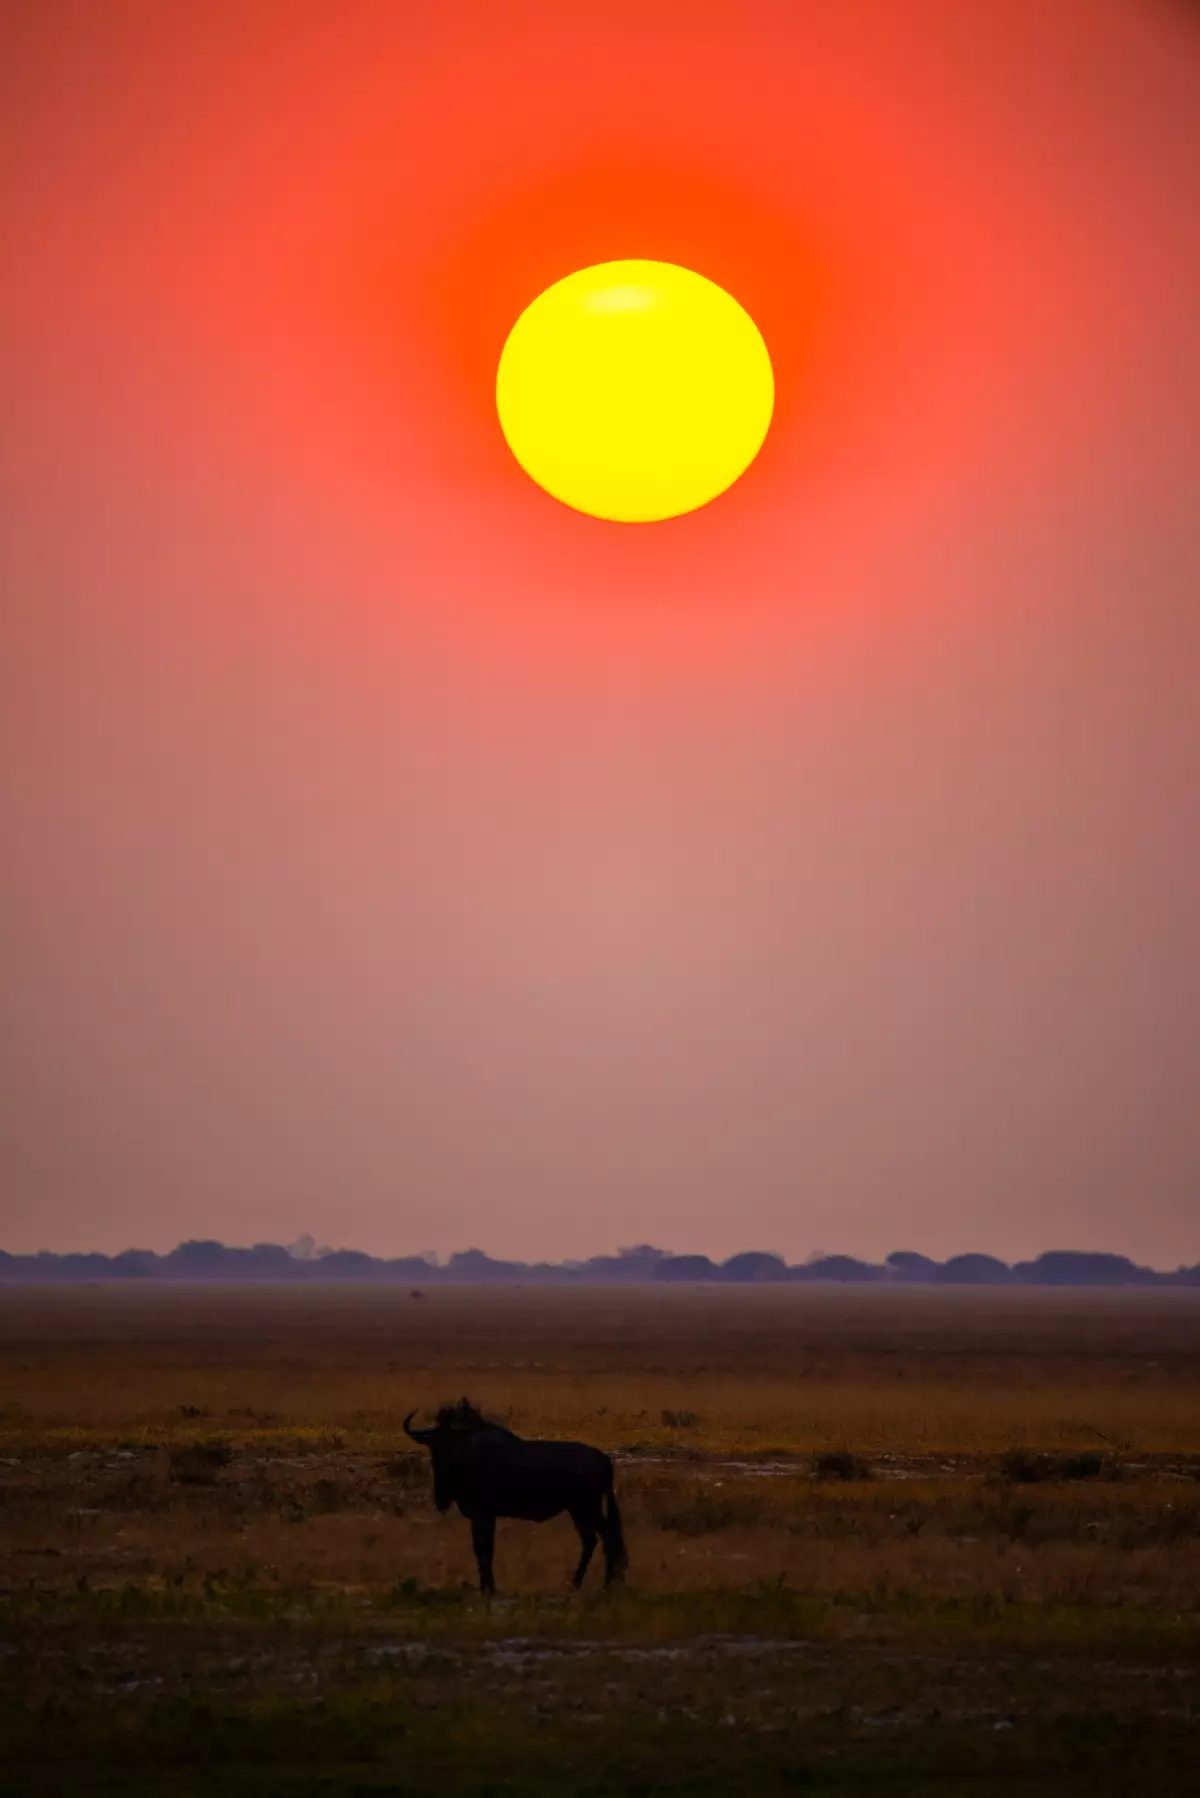 Sunset over african savannah with colorful sky and animal